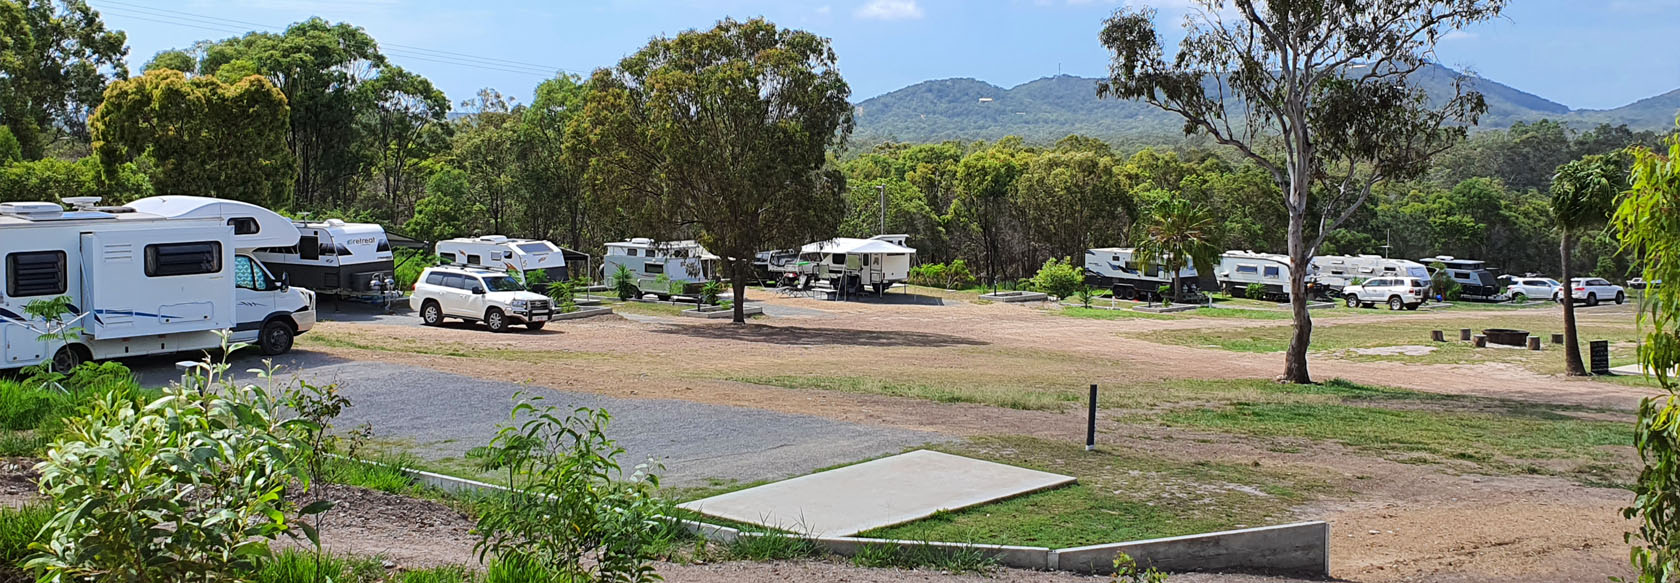 Lots of powered sites with caravan parked surrounded by trees.